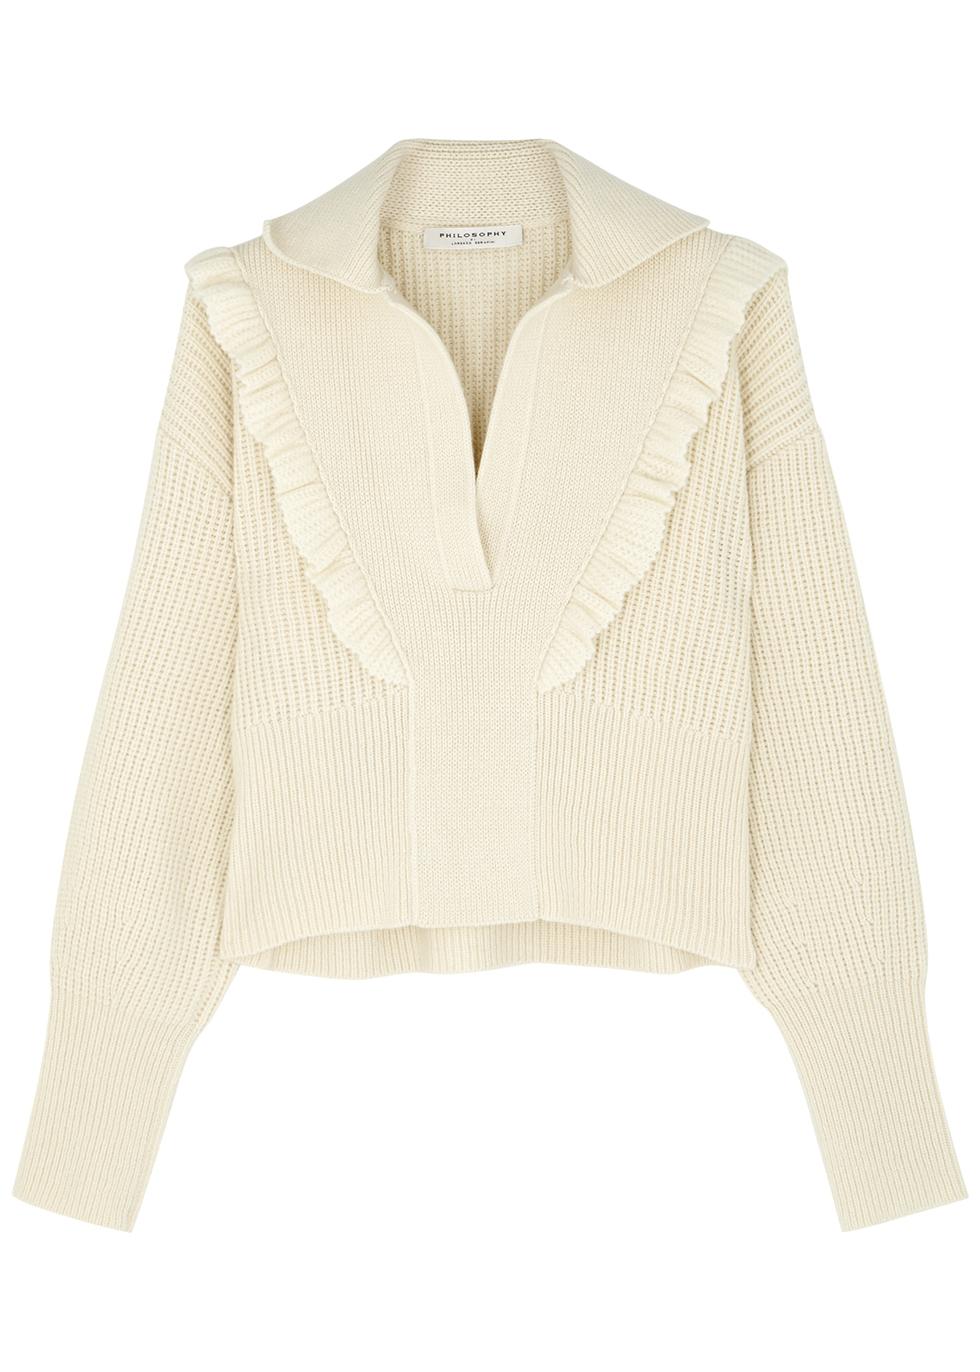 White Womens Clothing Jumpers and knitwear Jumpers Philosophy Di Lorenzo Serafini Wool Jonny Collar Ruffle Sweater in Ivory 